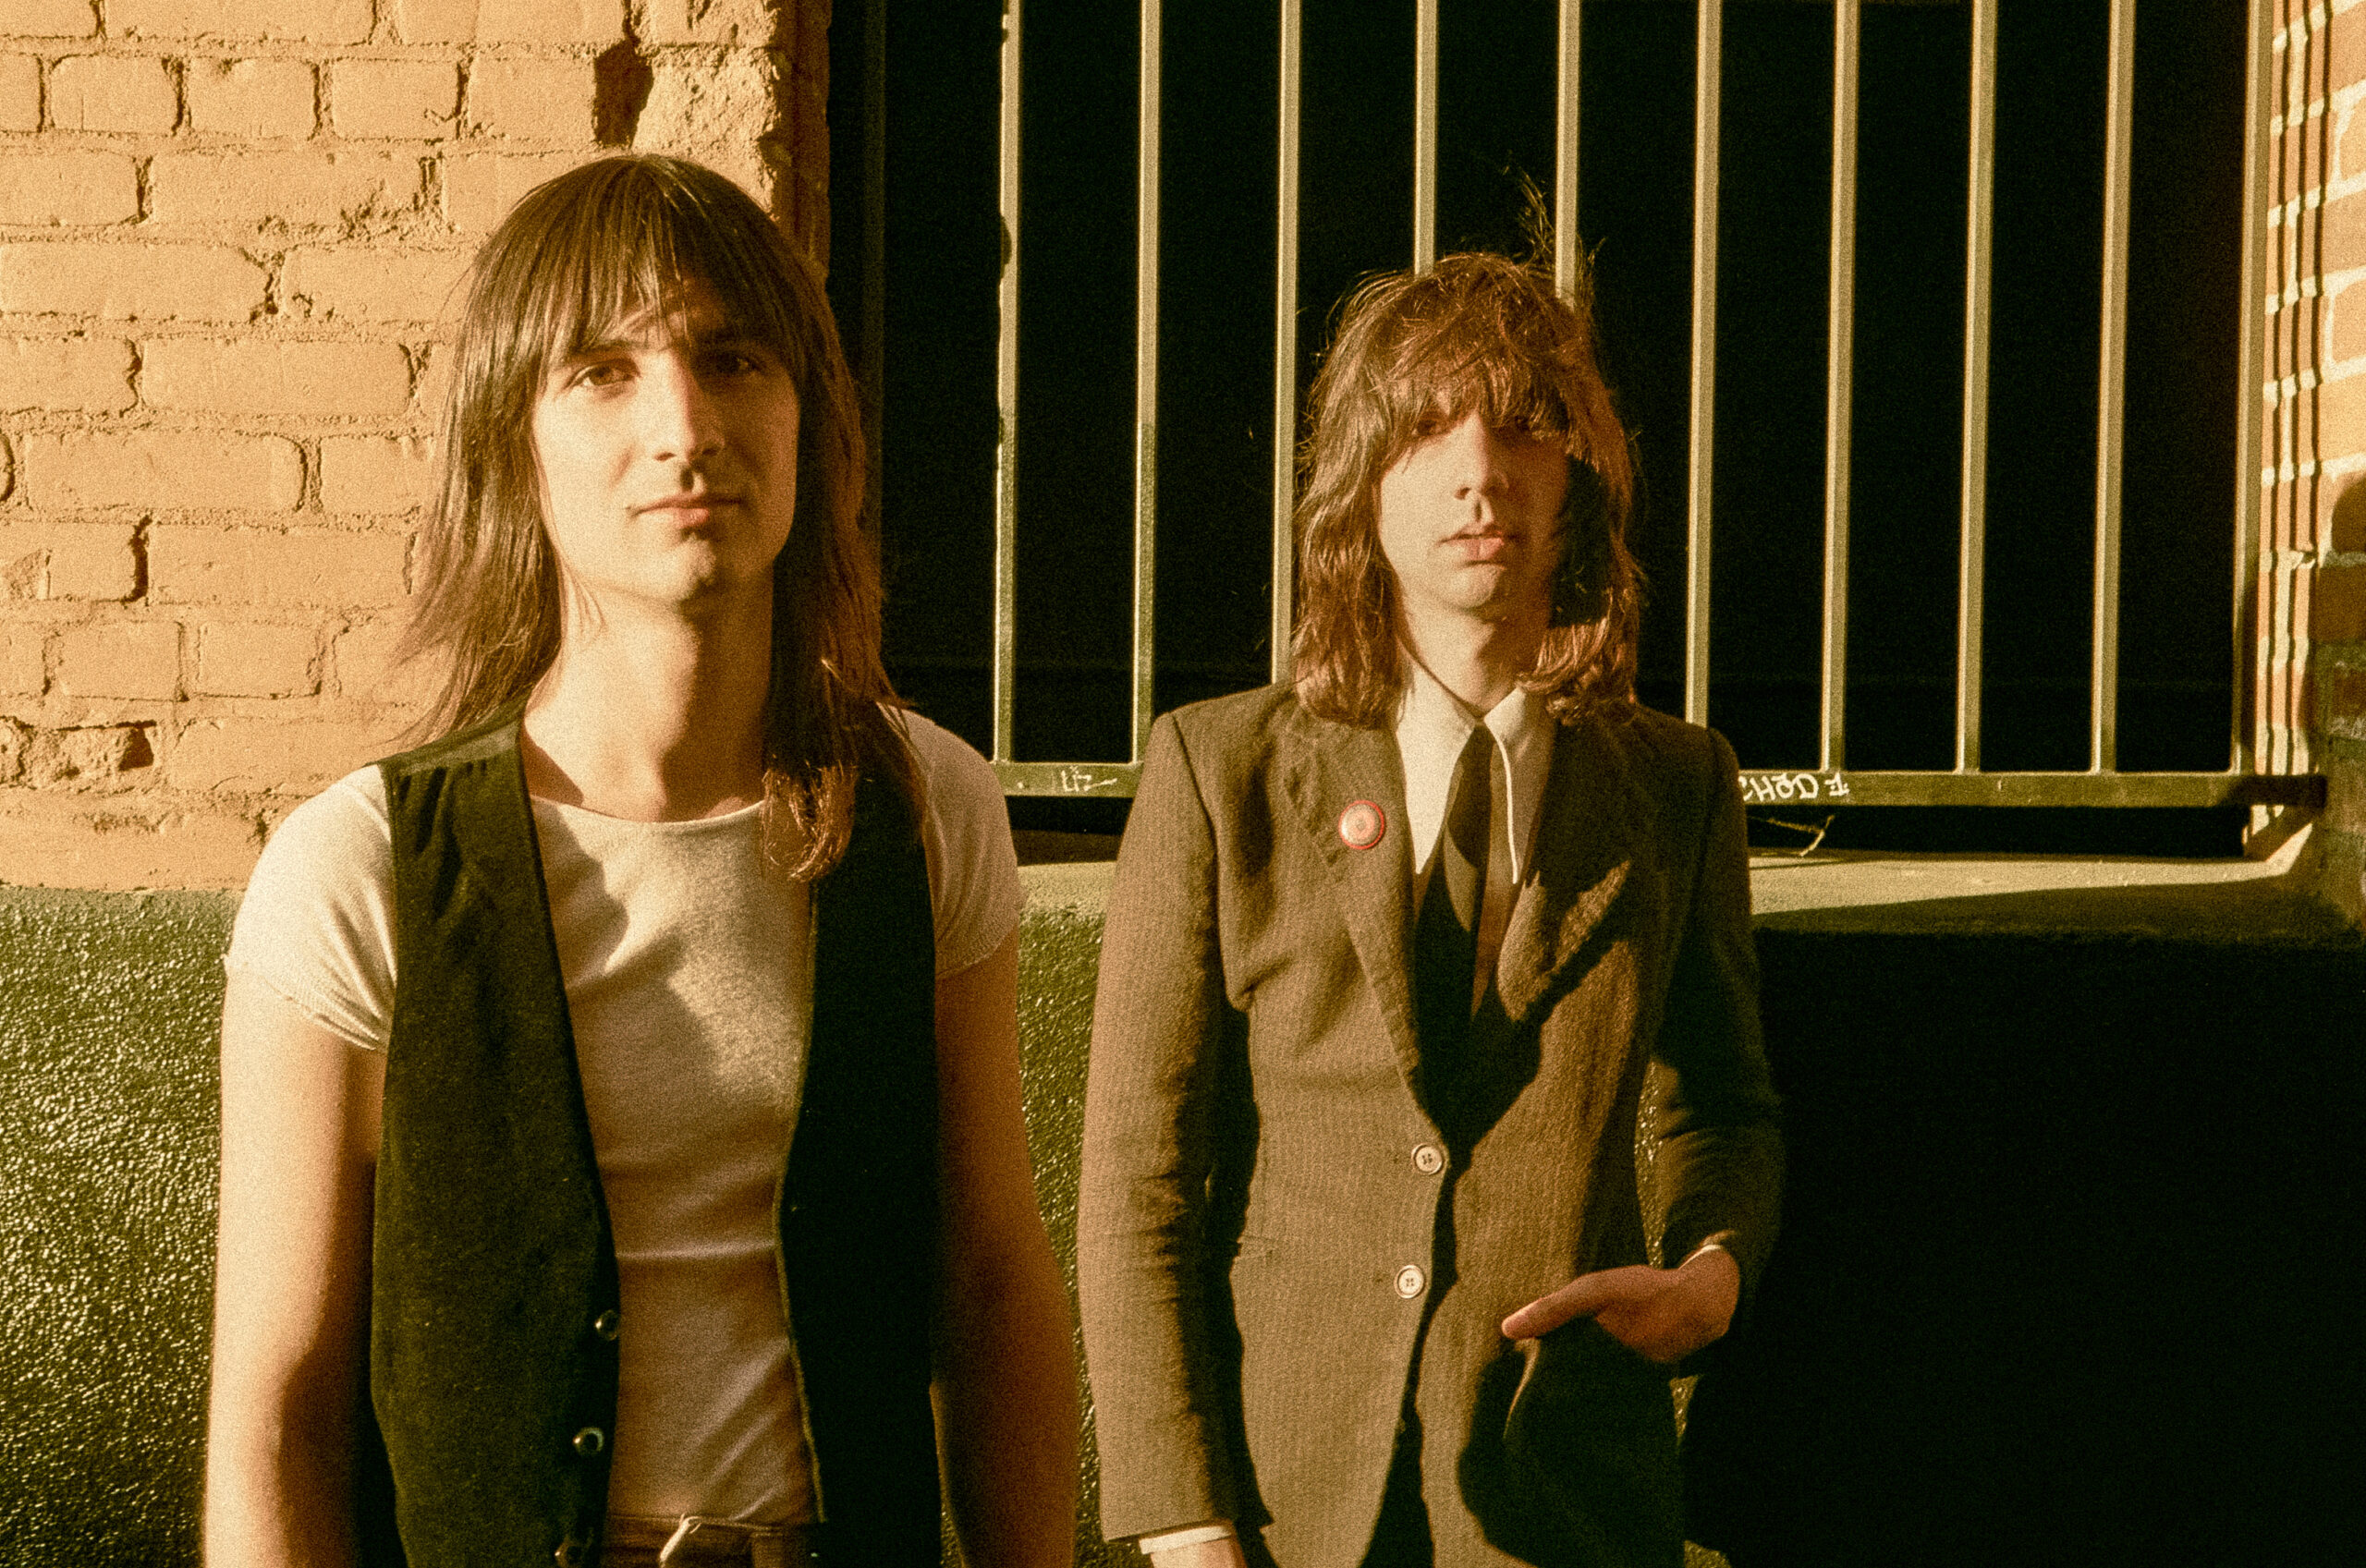 THE LEMON TWIGS – A Dream Is All We Know